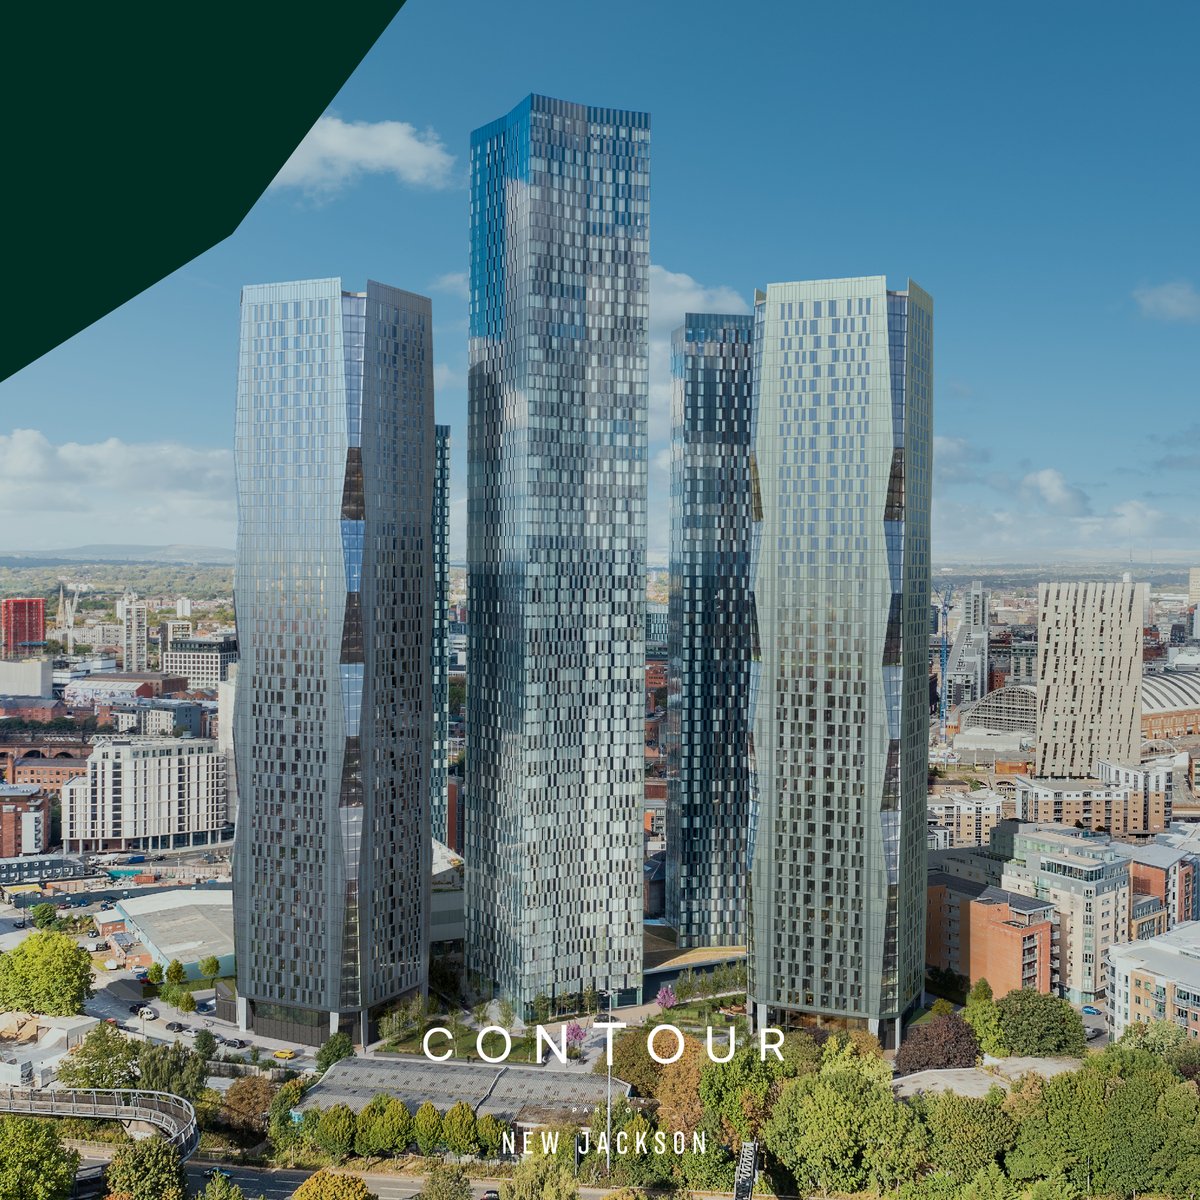 Contour's character is most defined by its sculpted edges, which draw in and out, creating an architectural spectacle in Manchester's ever-evolving skyline. Contour, part of Manchester's world-class skyscraper district, New Jackson. Secure now: contournewjackson.com